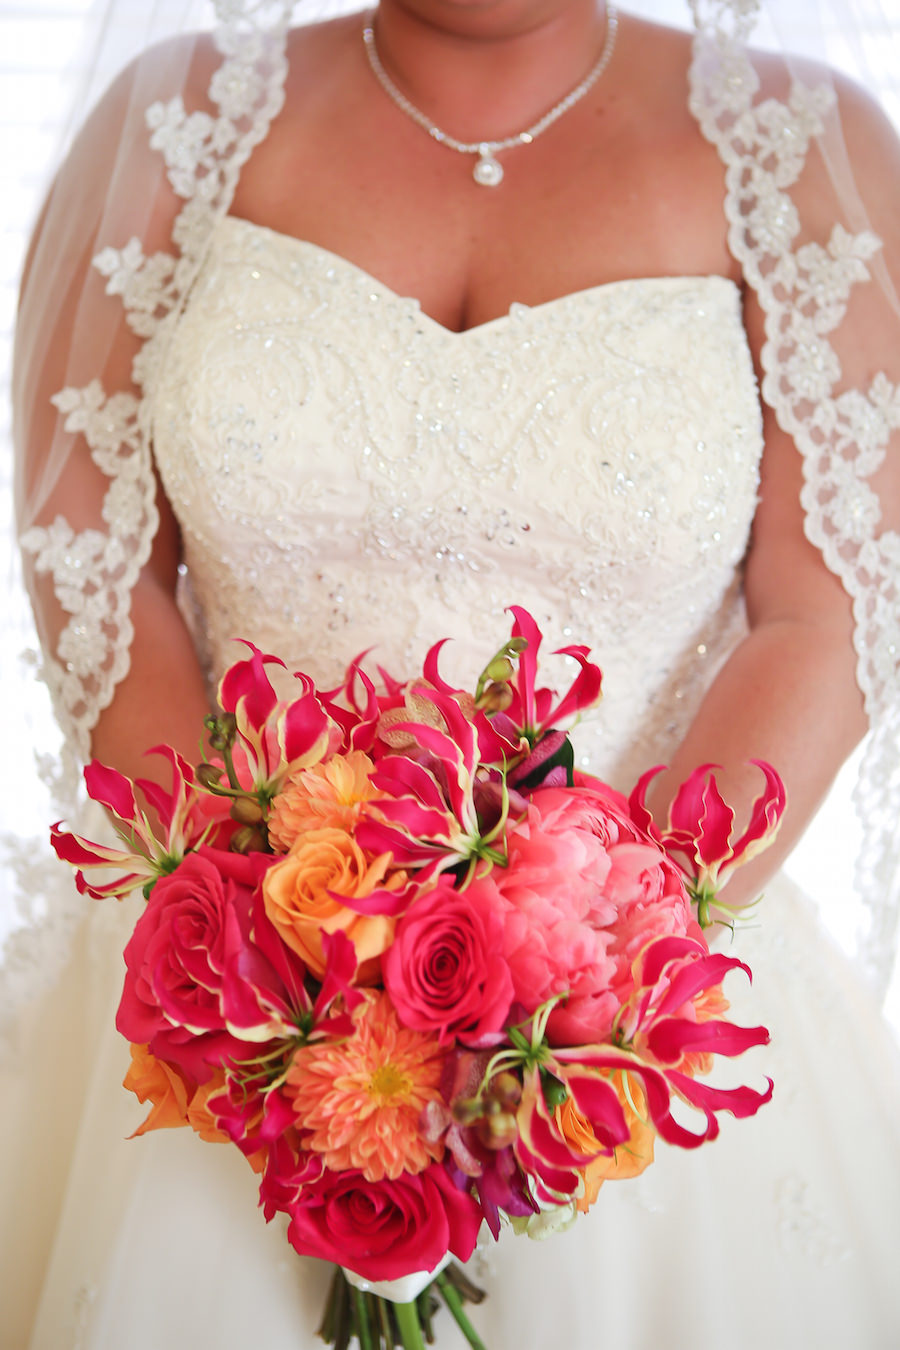 Bridal Wedding Portrait in Ivory Stella York Wedding Dress and Bright Pink and Orange Bouquet with Roses, Peonies and Gerbera Daisies | St Petersburg Wedding Planner Exquisite Events